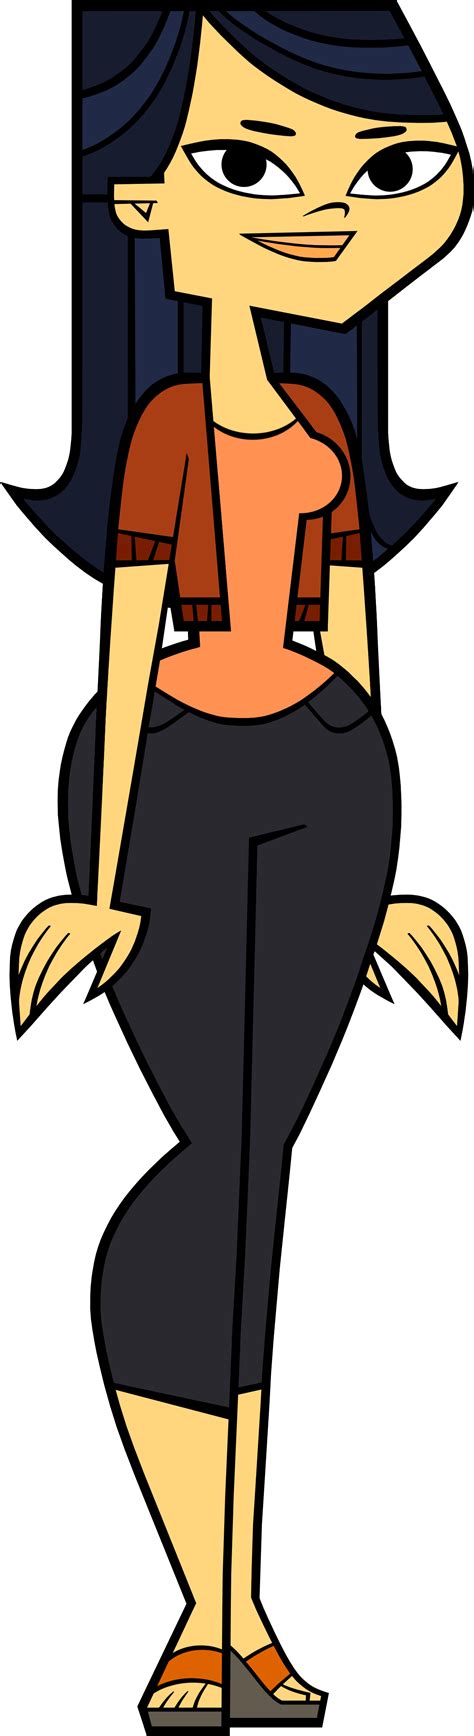 emma from total drama